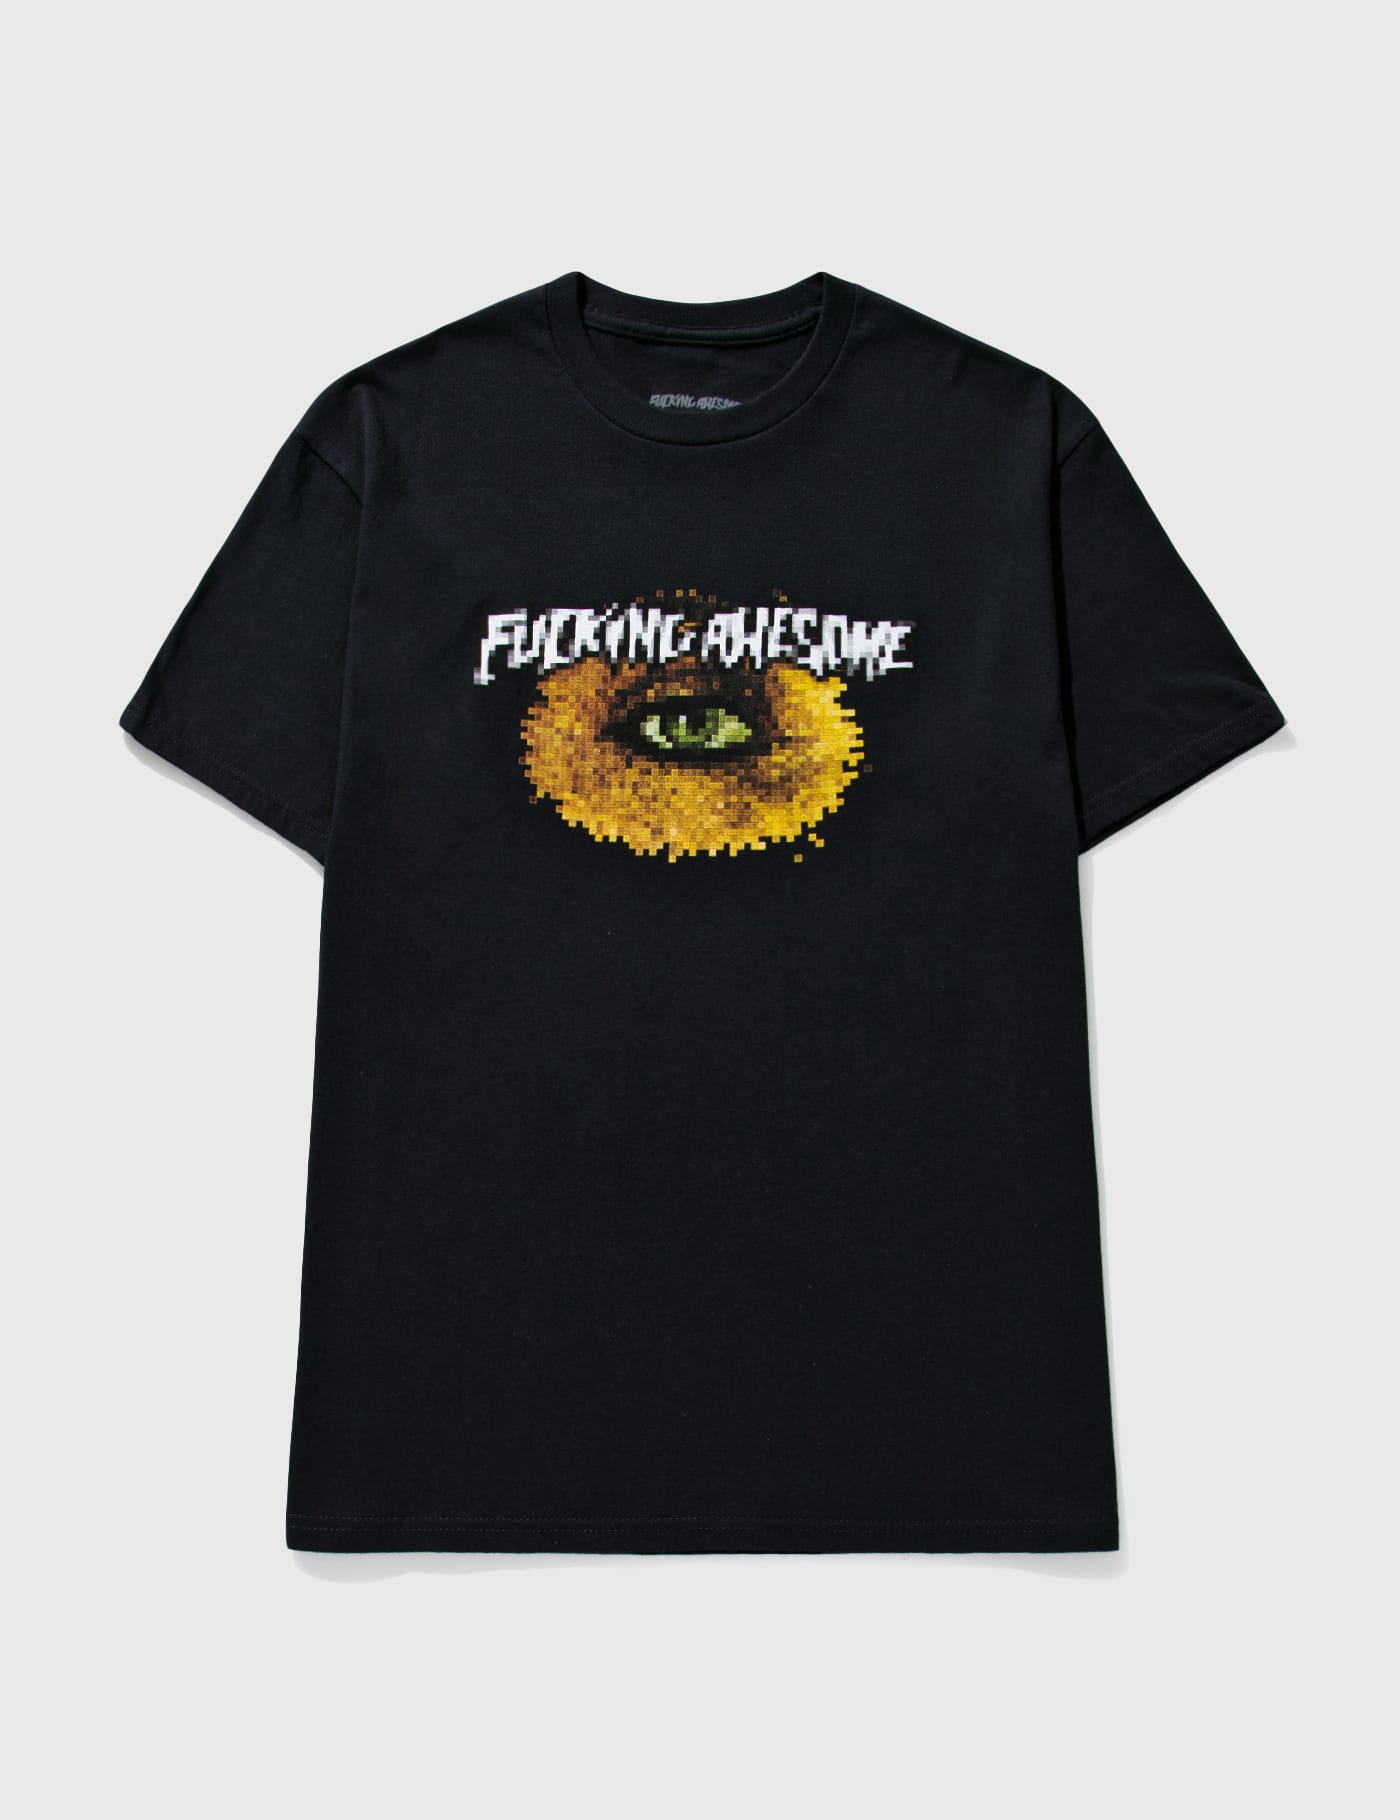 Fucking Awesome - Pixel Eye T-shirt | HBX - Globally Curated